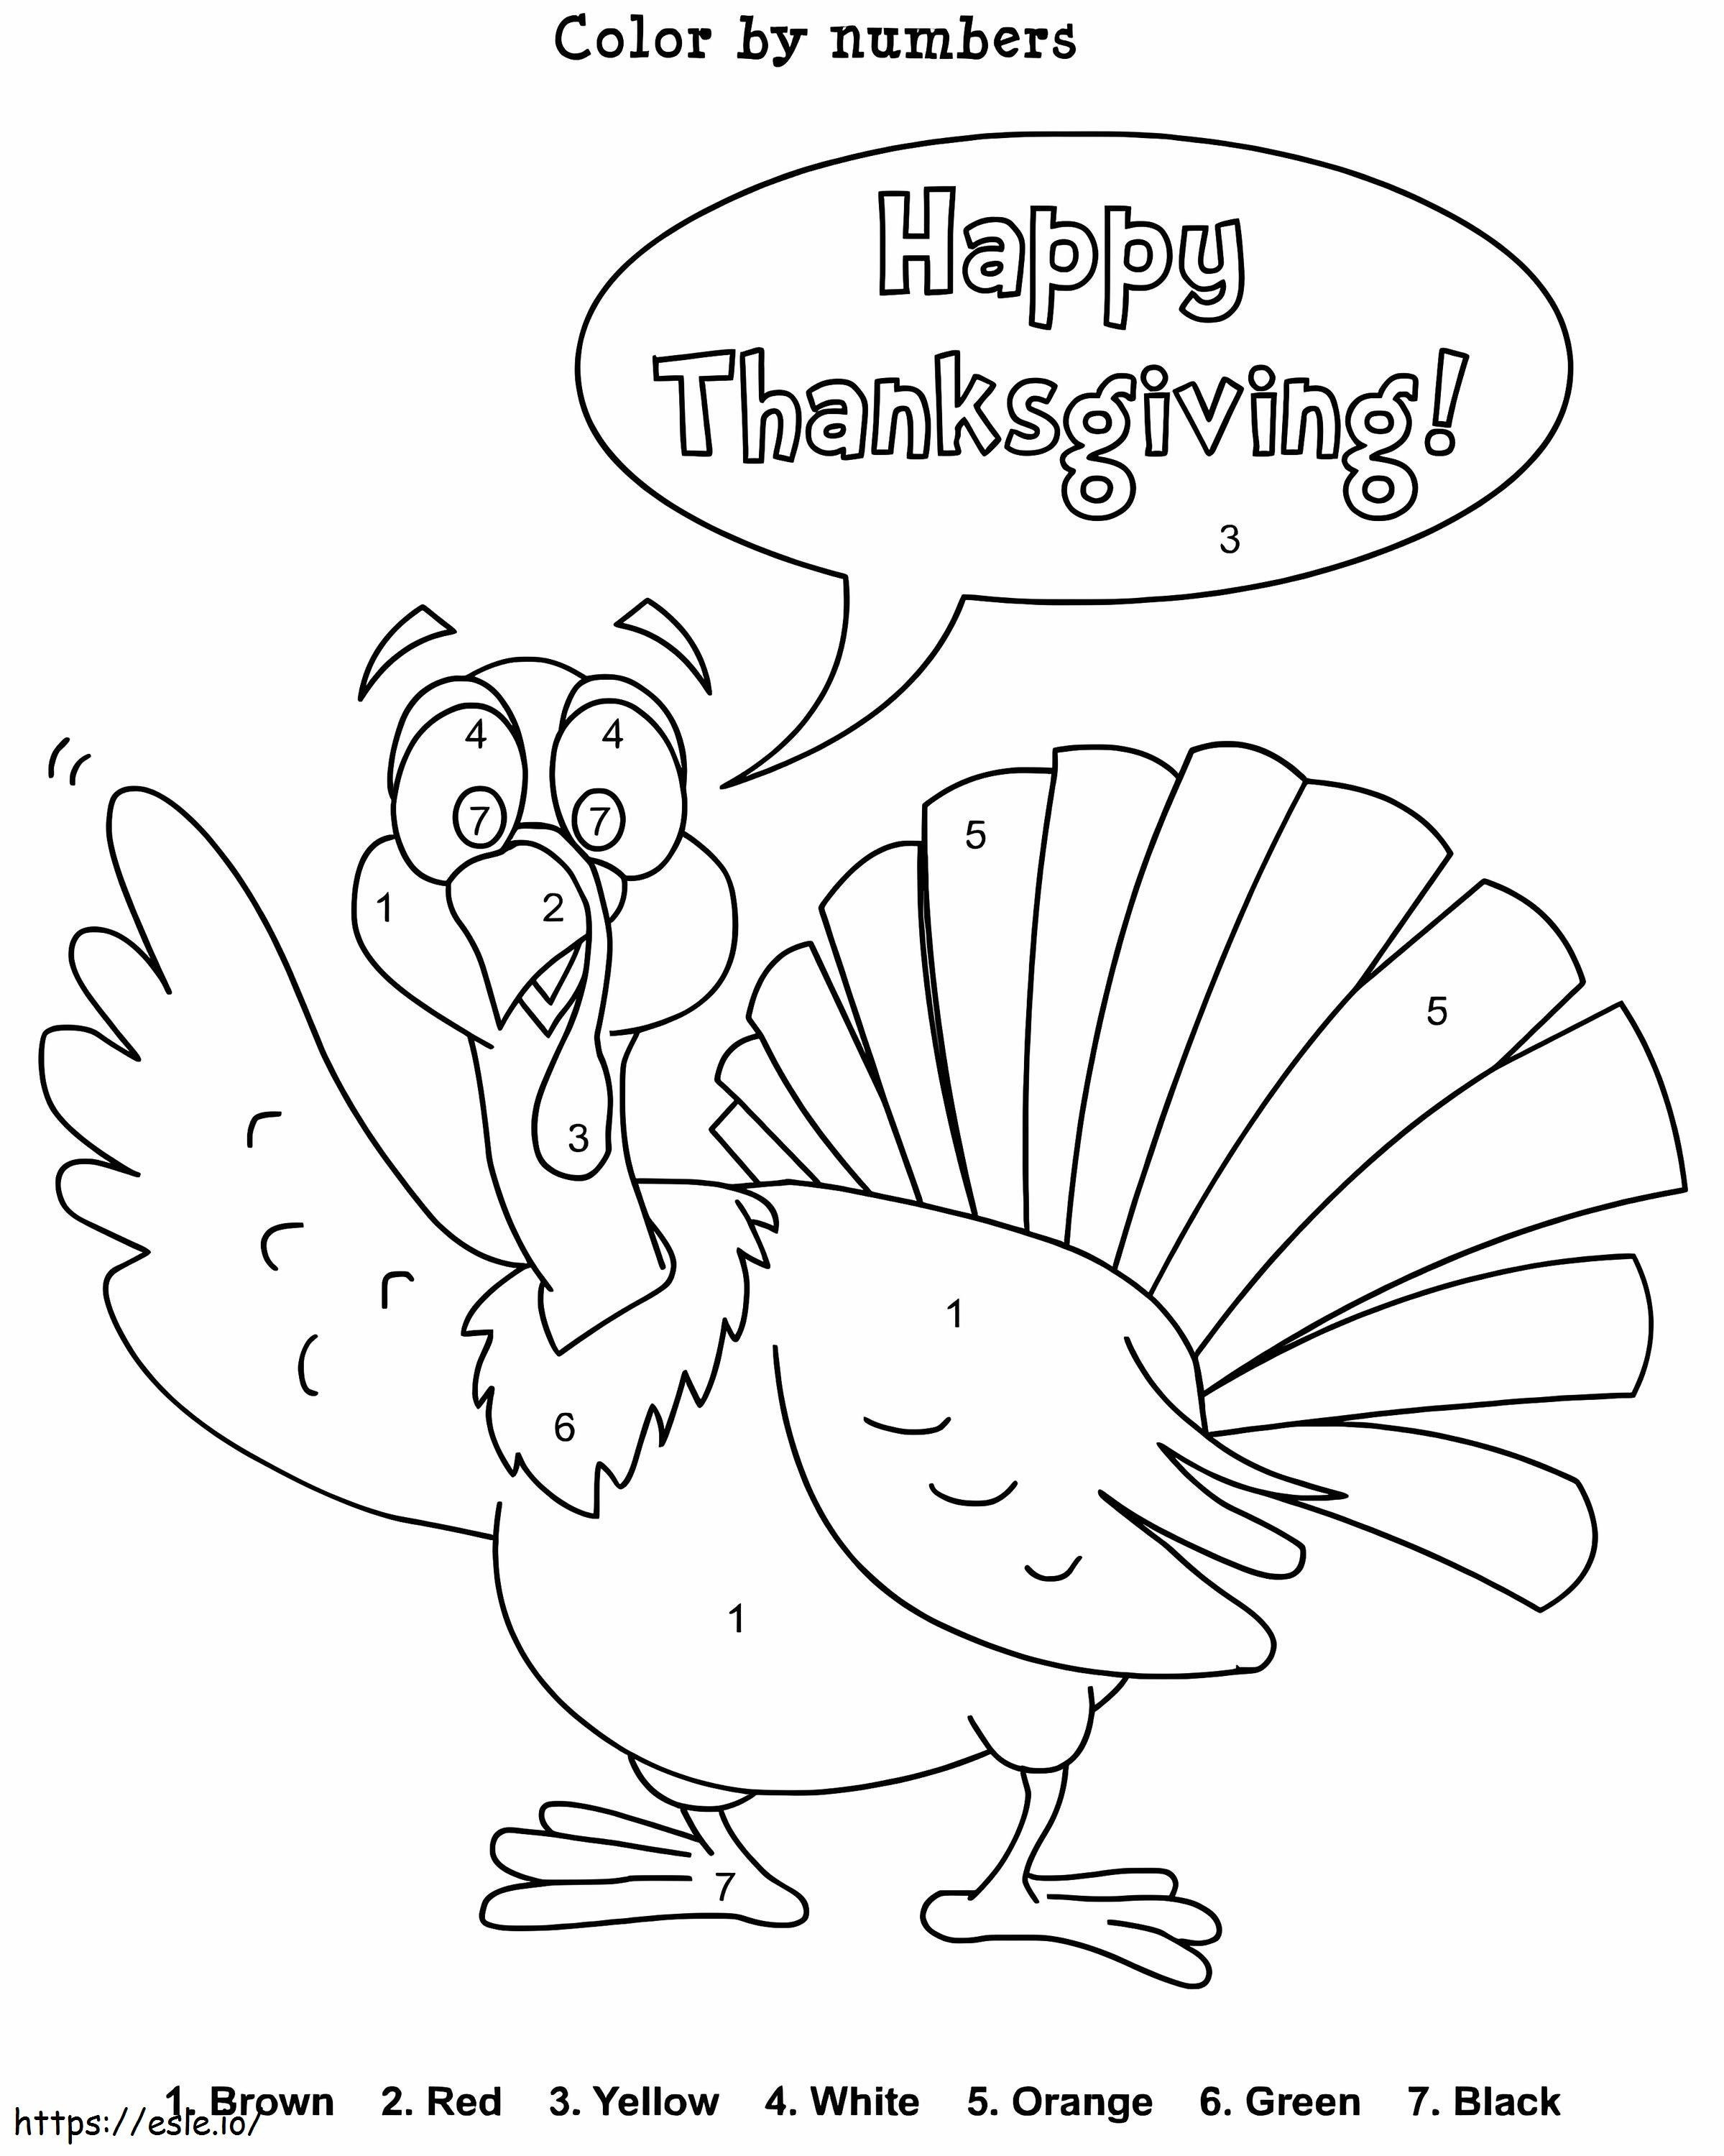 Cartoon Turkey Color By Number coloring page